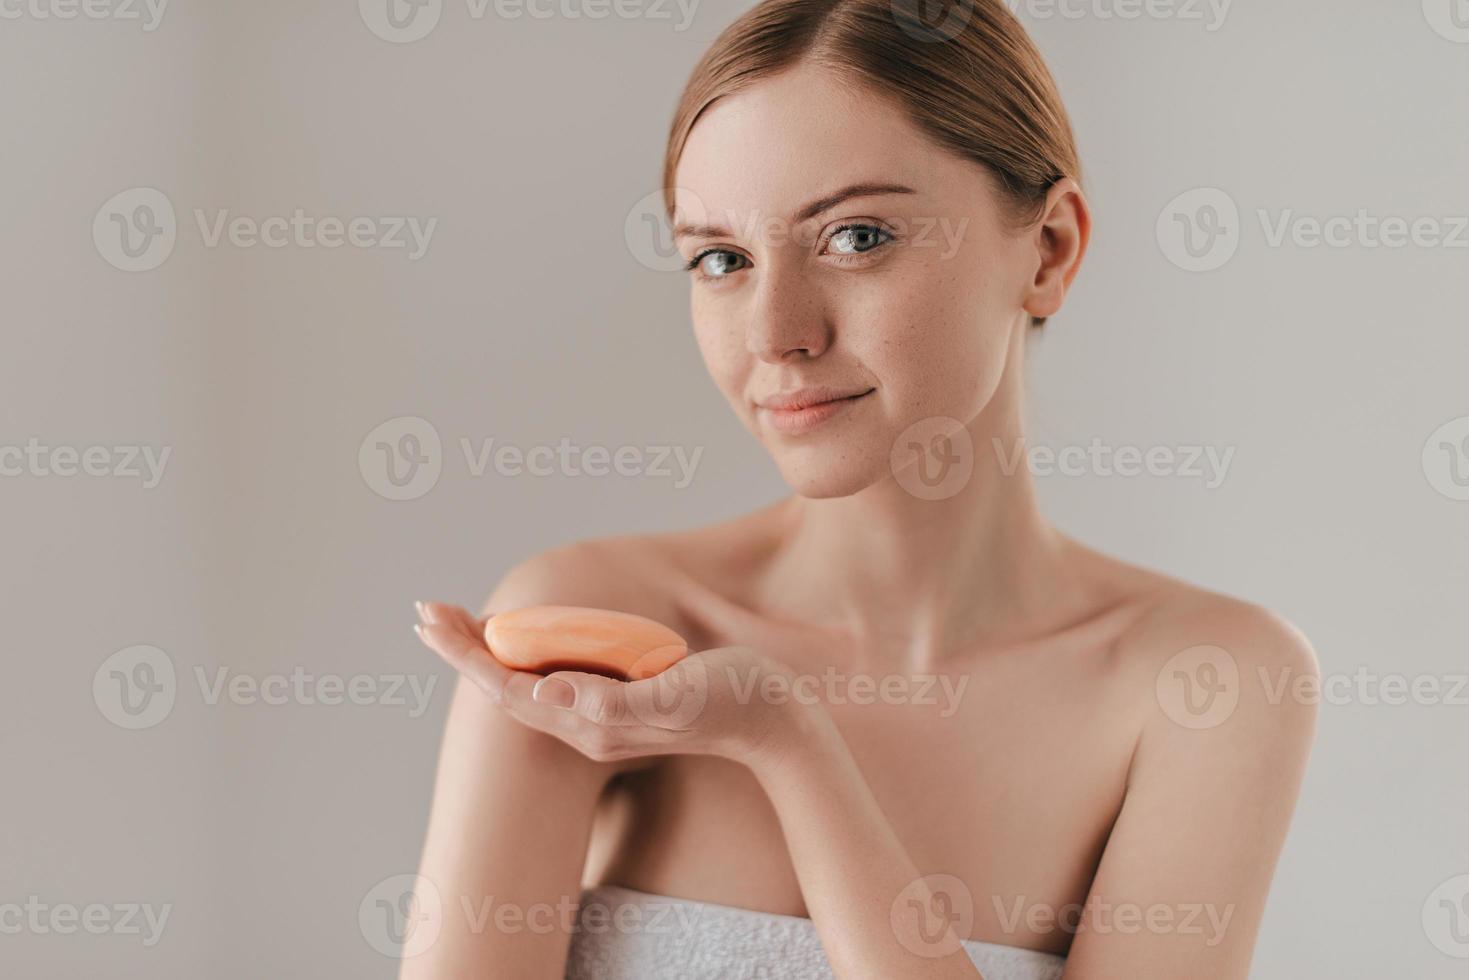 Perfect body care. Beautiful young woman with freckles on face holding soap and looking at camera while standing against background photo